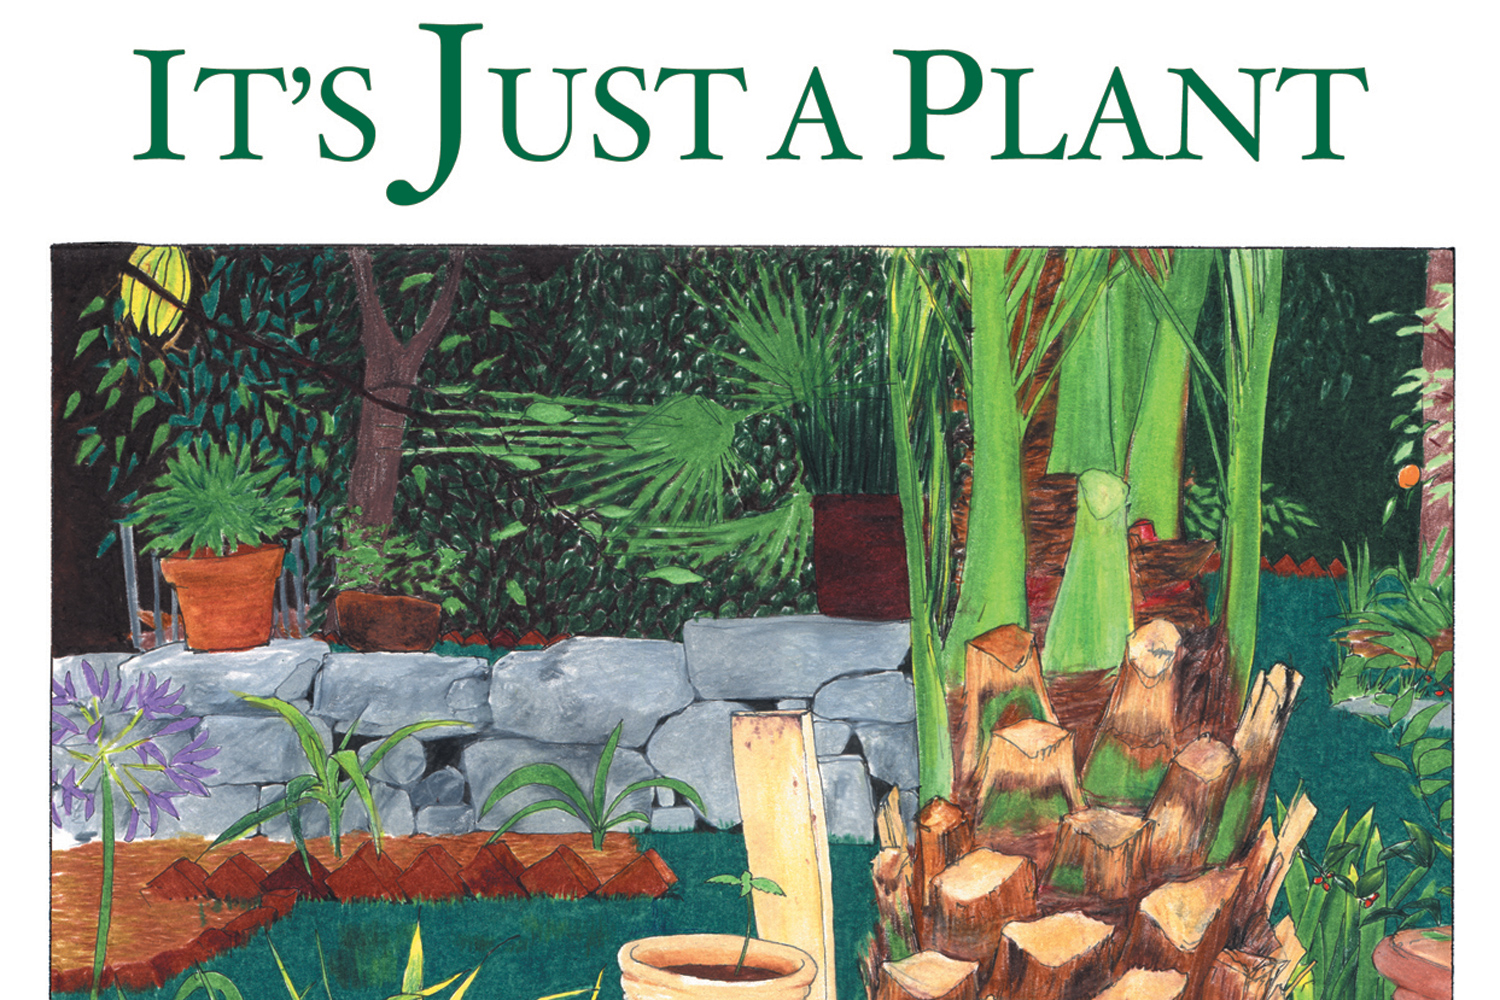 "It's Just a Plant" illustrated children's book by Ricardo Cortés